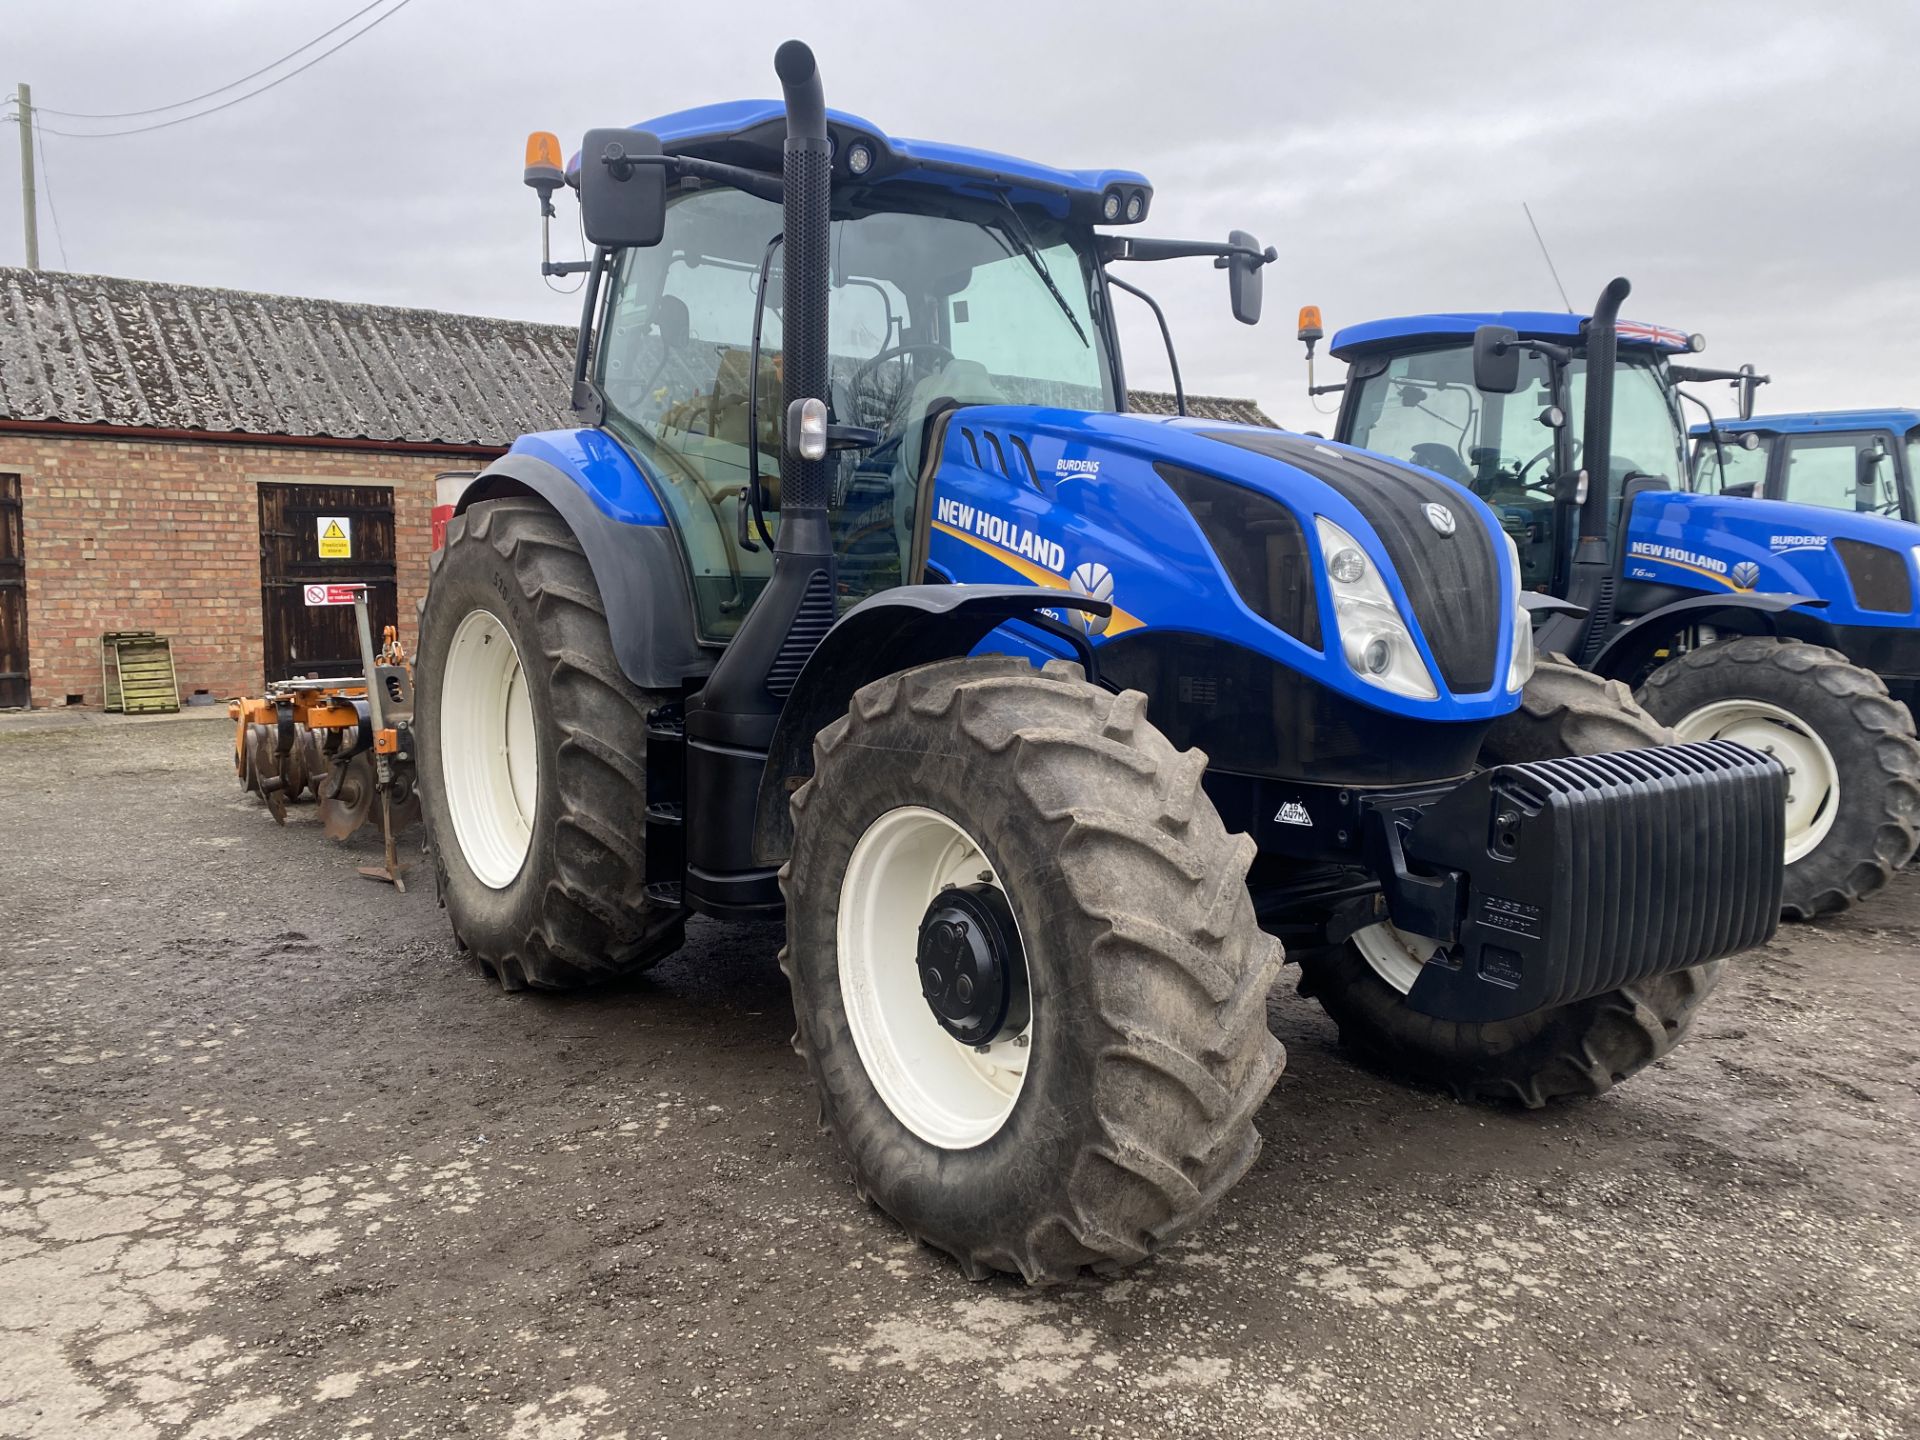 (17) New Holland T6 180 4wd tractor, 50k, Air Brakes, 6 cylinder, 150 hp, 2,900 hrs, Air Con, sold - Image 3 of 3